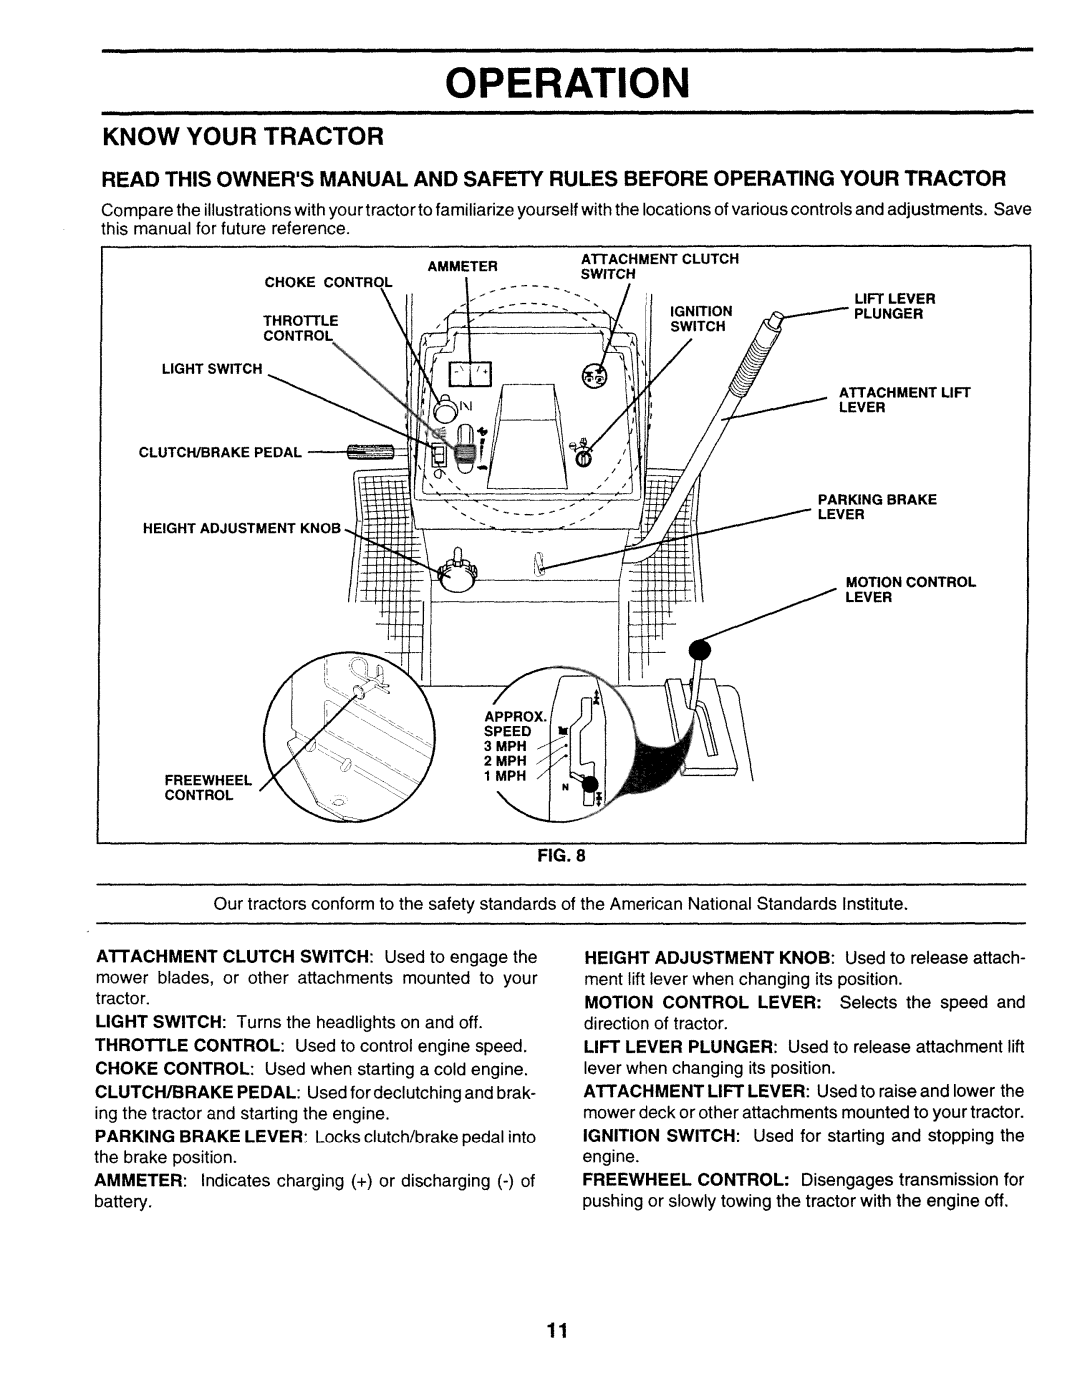 Sears 917.25271 owner manual Operation, Know Your Tractor, Fig, tractor, LIGHT SWITCH: Turns the headlights on and off 